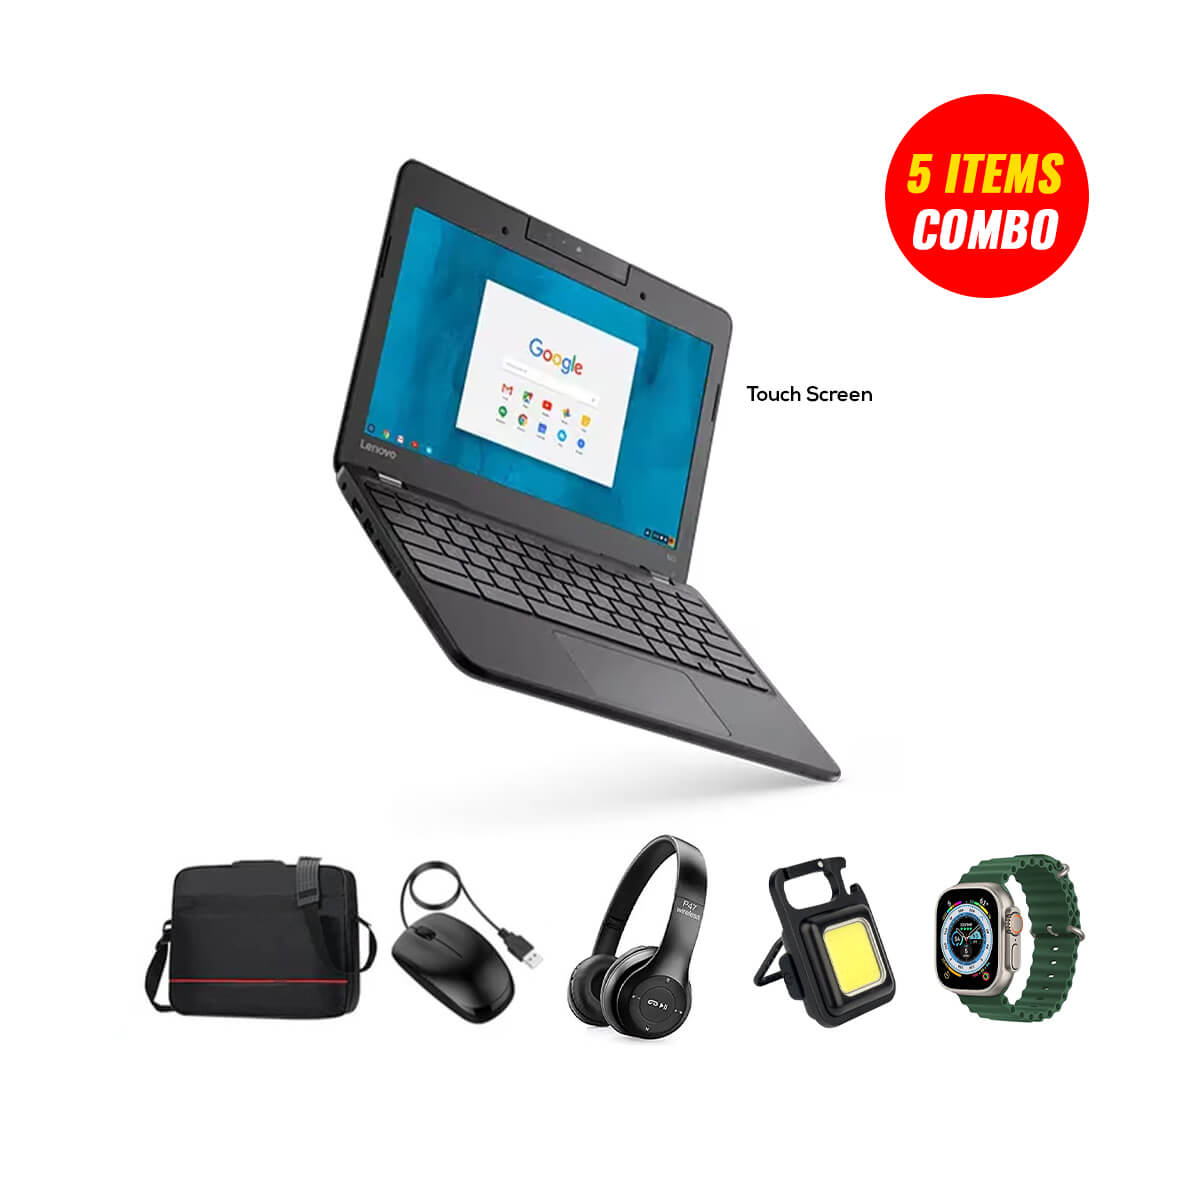 Used Lenovo Chromebook N22/N23 Non Touch 4GB RAM + 16GB Memory (4 Items Combo Bundle A)